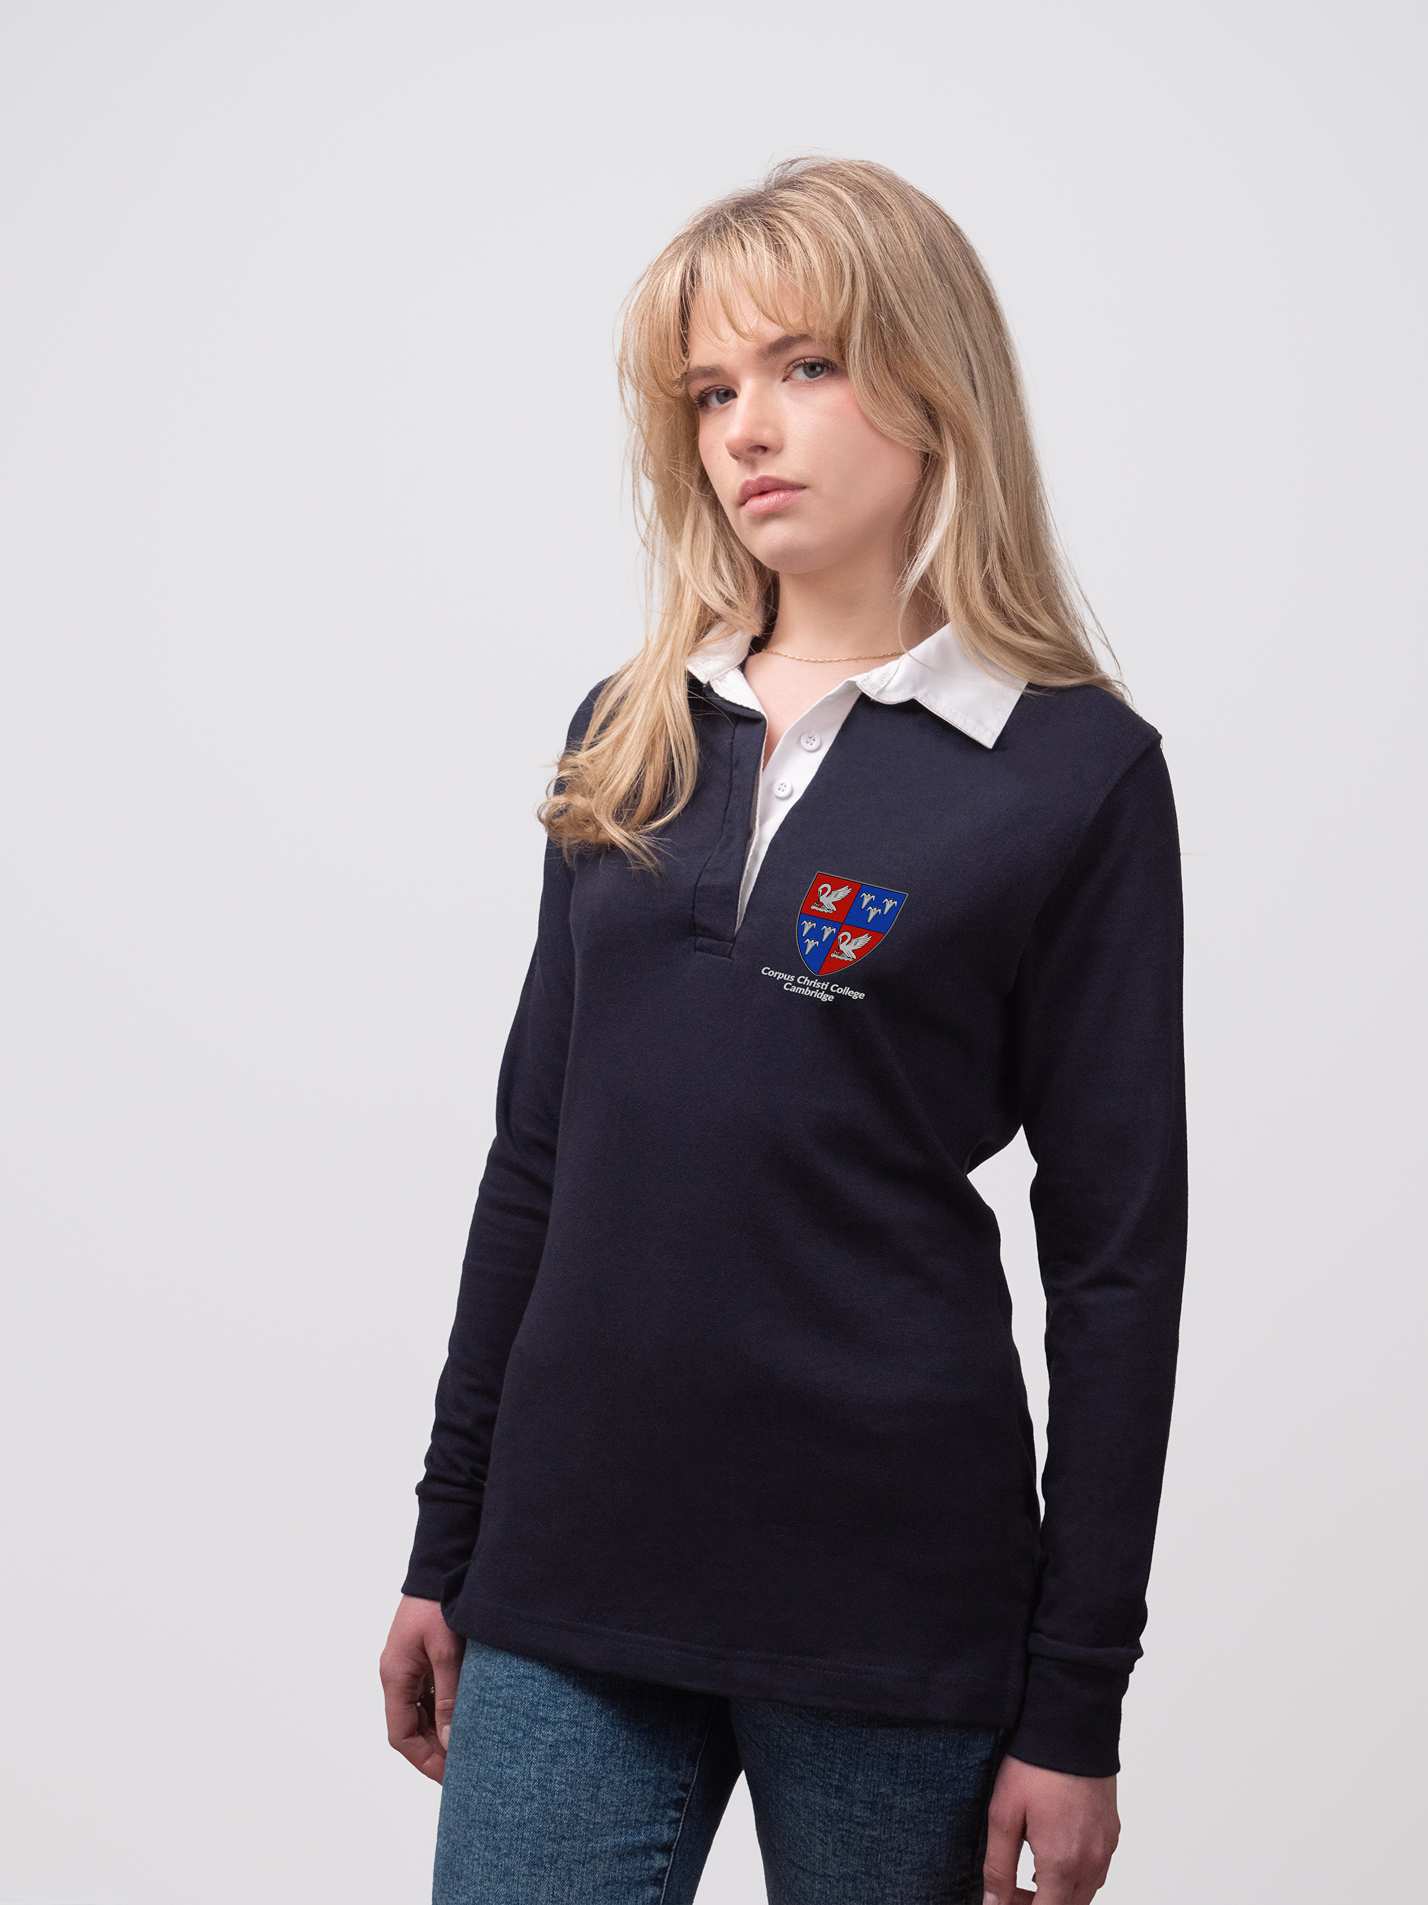 Student wearing a navy Corpus Christi College rugby shirt with embroidered crest